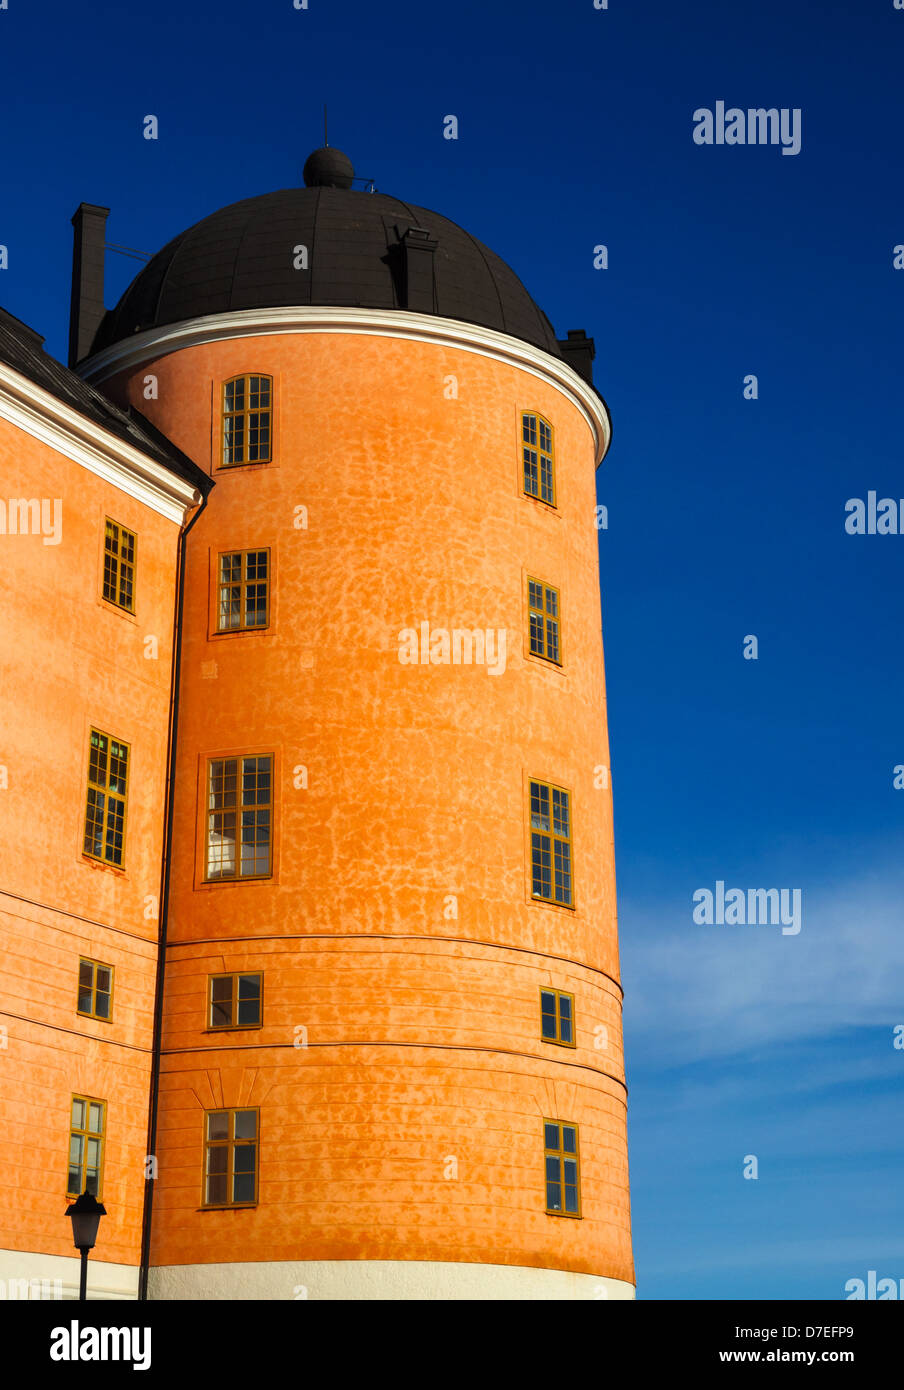 Tower of Uppsala Castle, Sweden, Scandinavia. This old historic castle became a residential building. Stock Photo